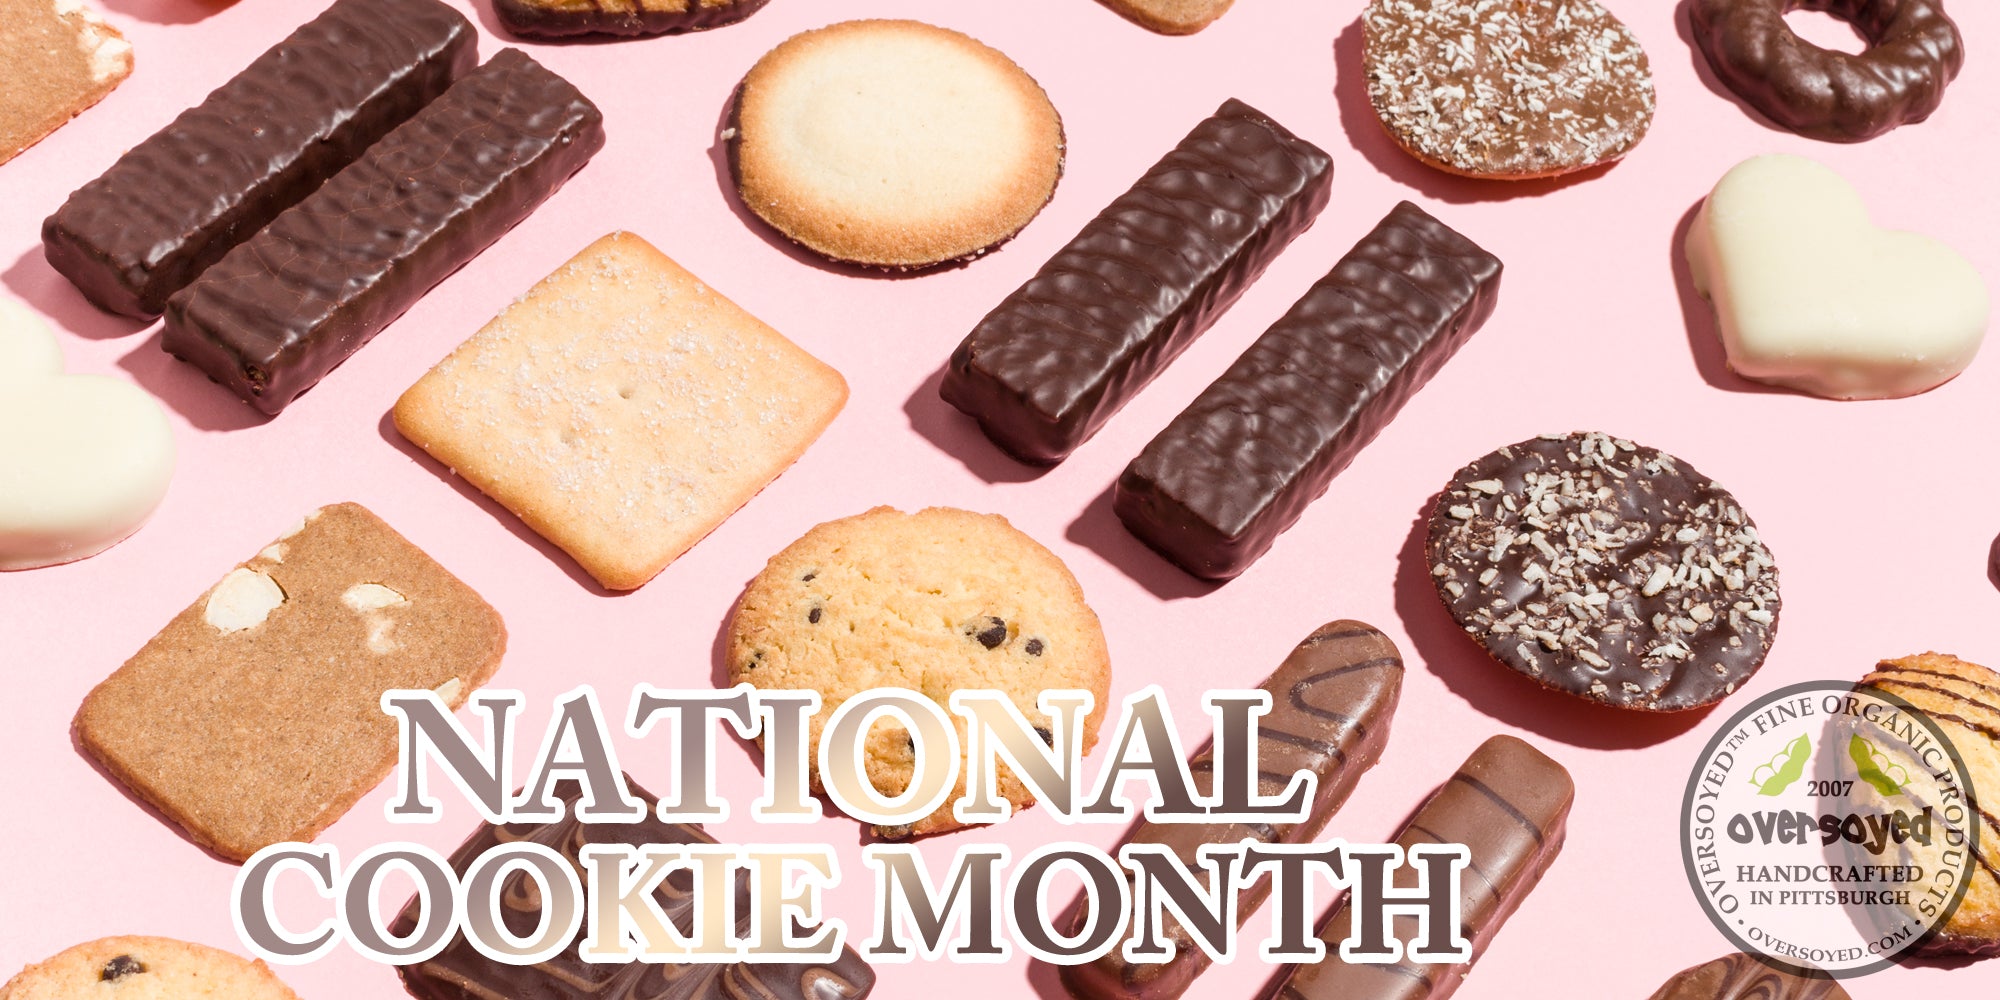 OverSoyed Fine Organic Products - National Cookie Month